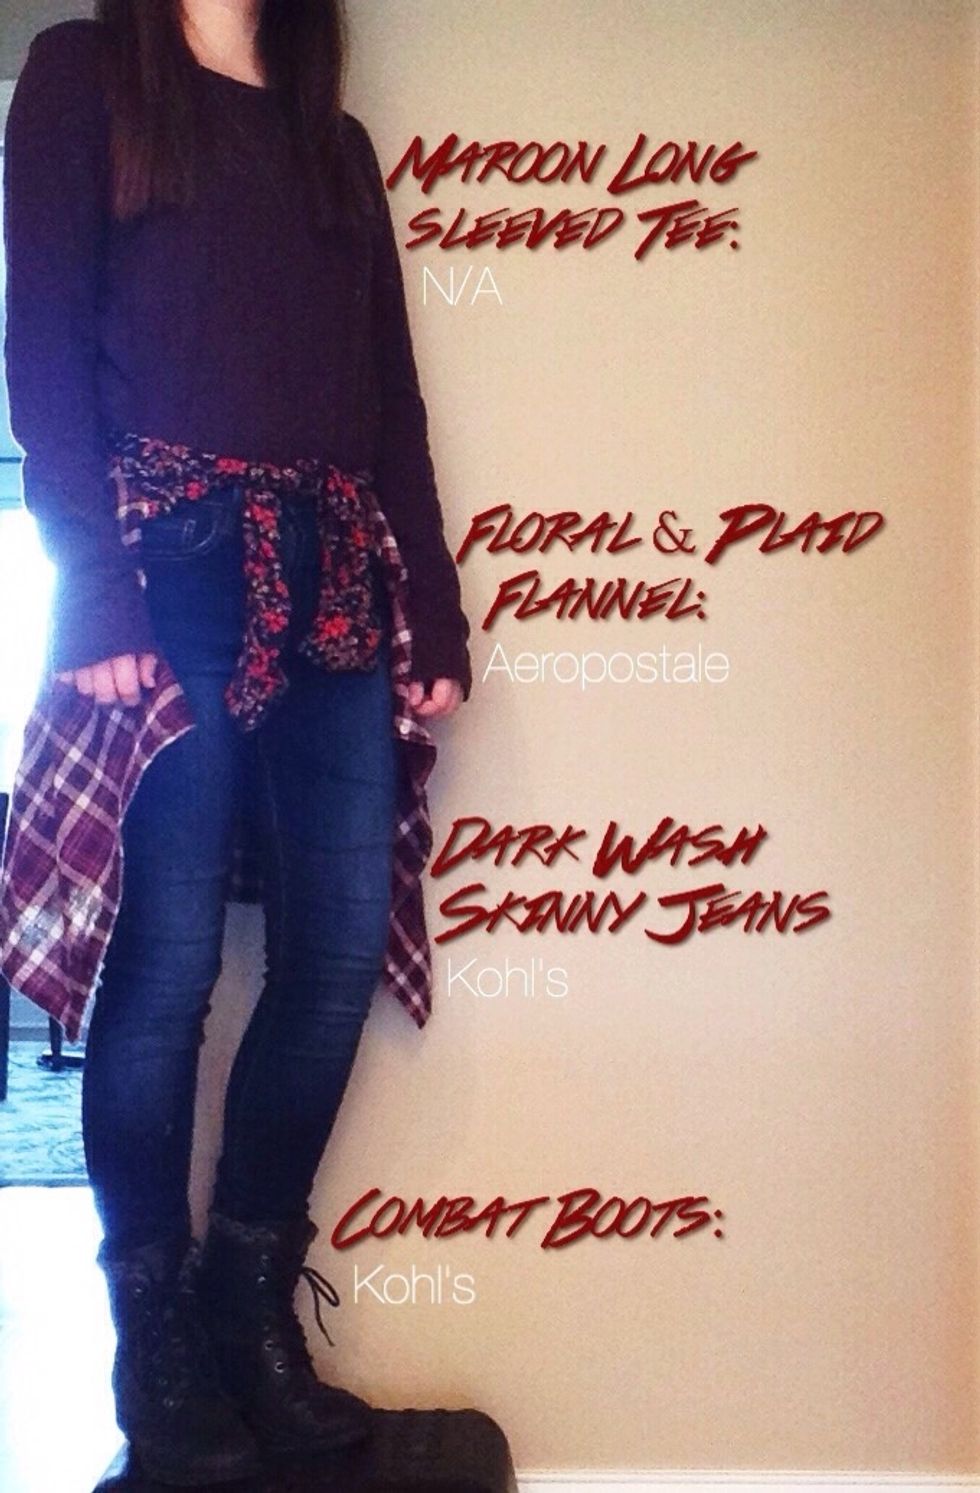 For the last outfit, I decided to go a bit more grunge. I started off with the same dark maroon tee, then added a plaid & floral flannel. I finished off with dark washed skinny jeans and black boots.